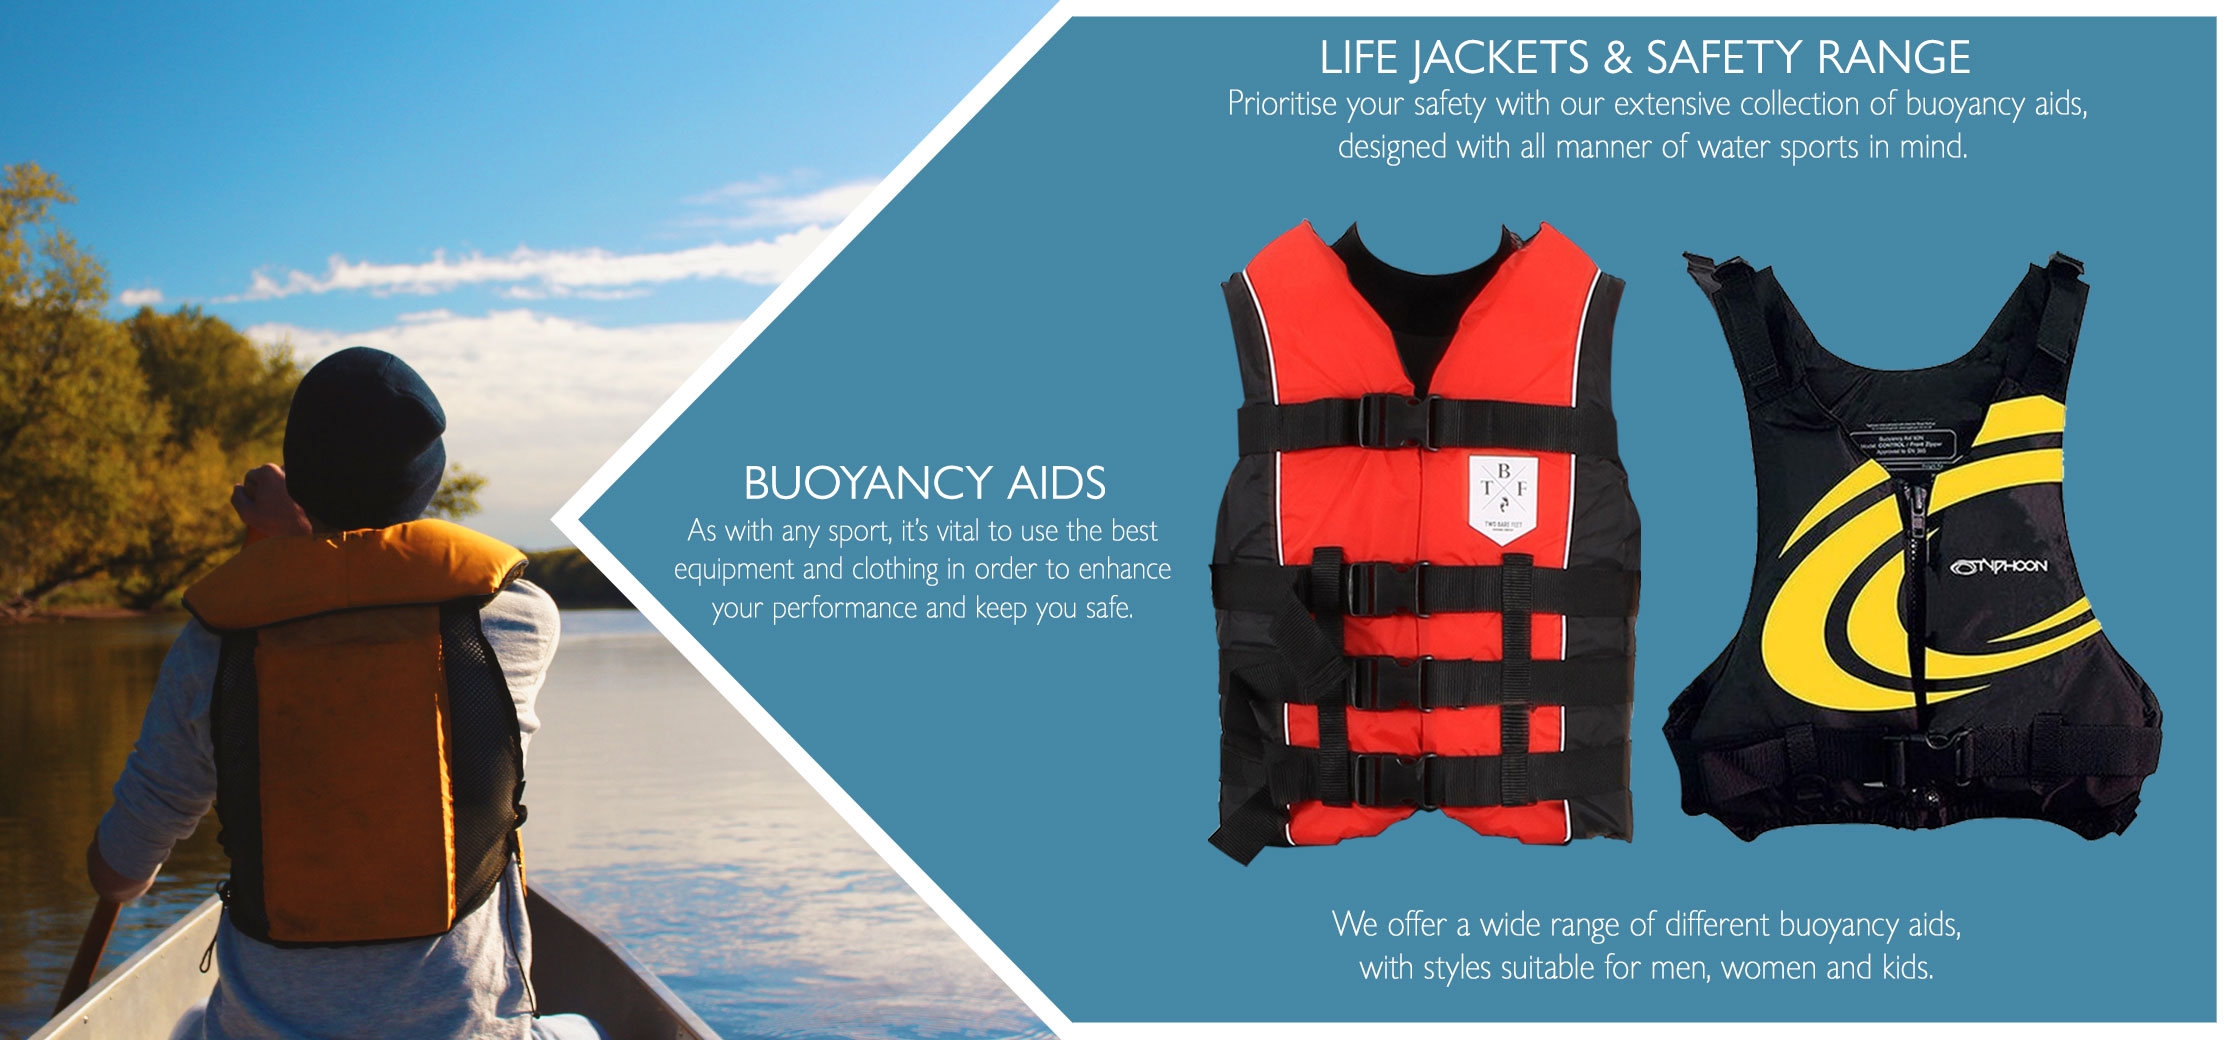 Life jackets and safety information